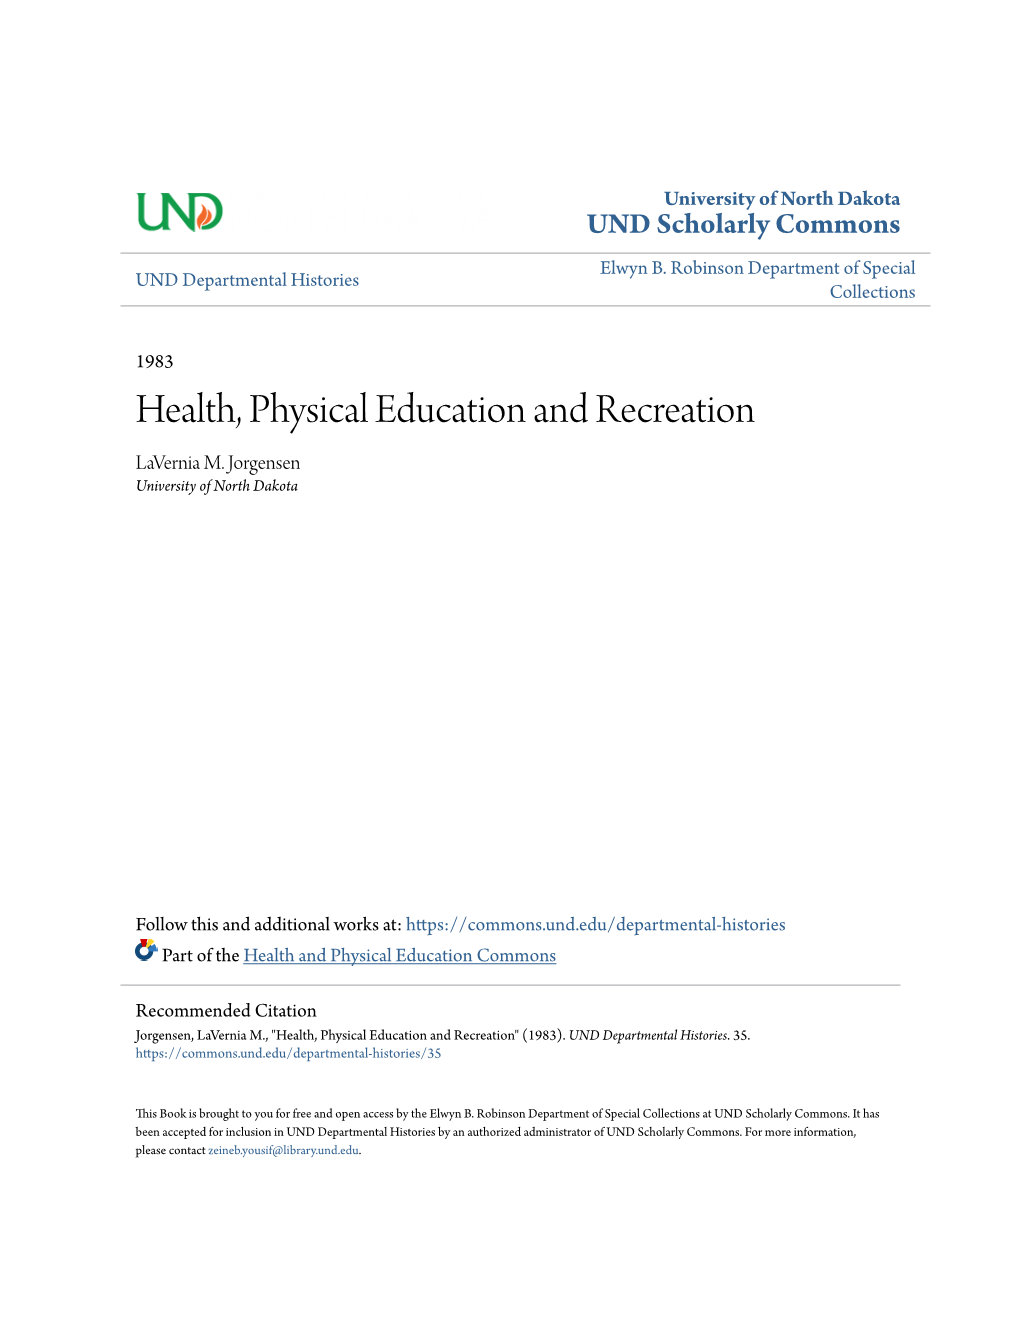 Health, Physical Education and Recreation Lavernia M